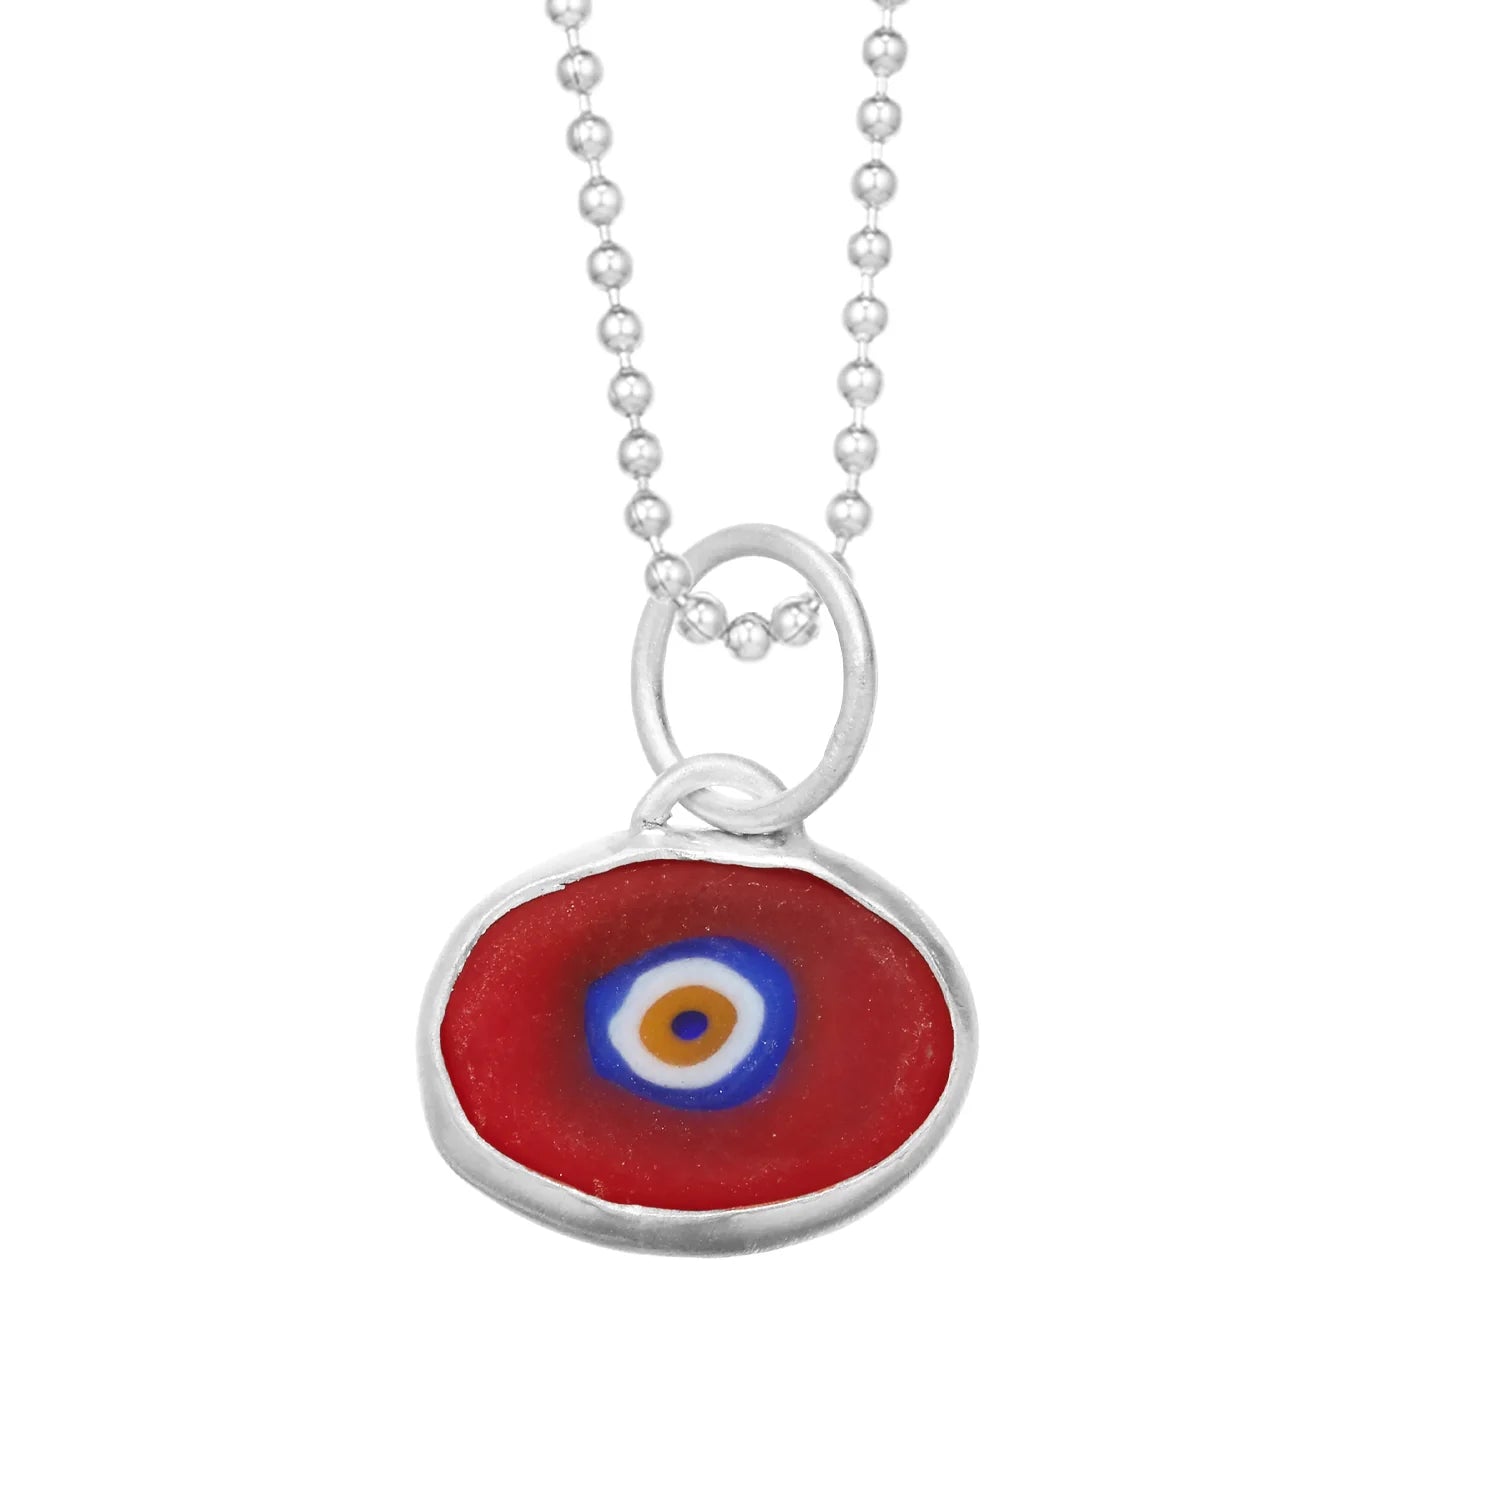 Red Protection Juju Eye in Sterling Silver - Something about Sofia